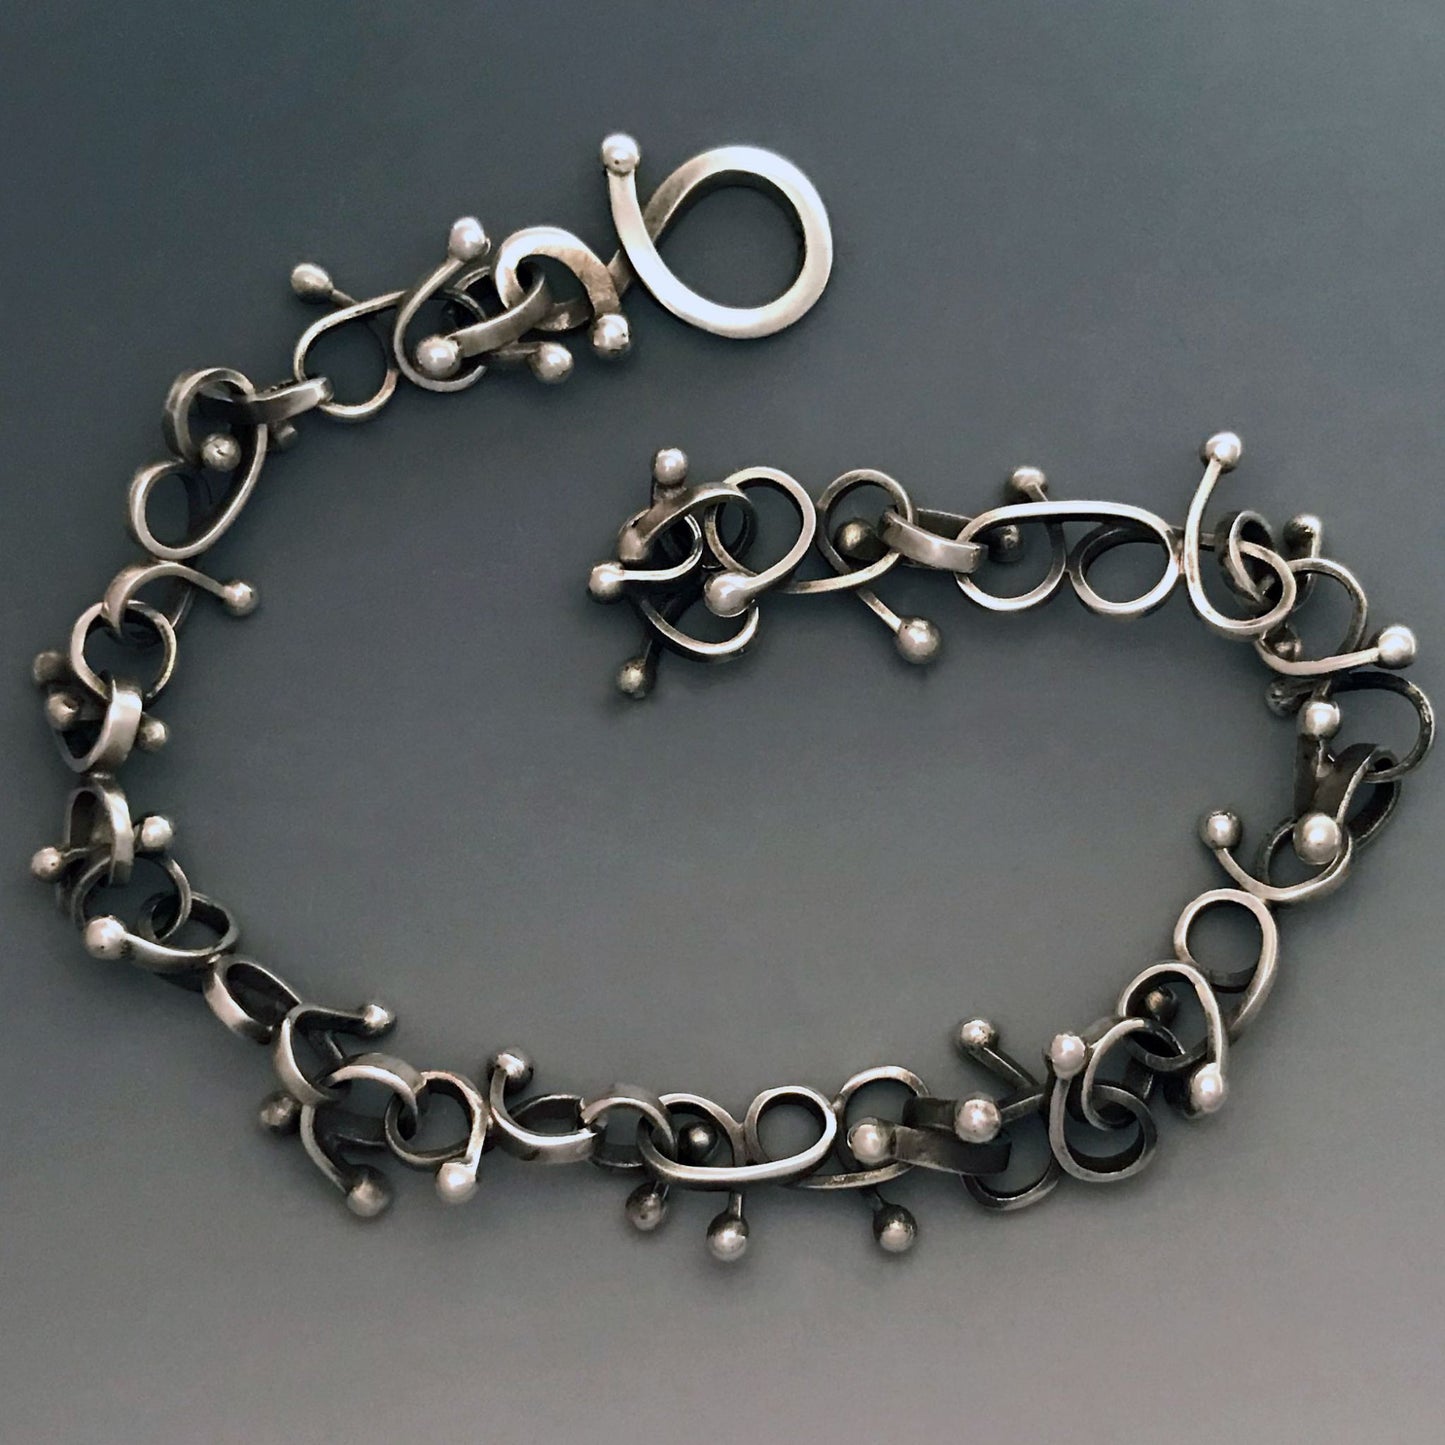 Modern silver chain bracelet By Suzanne Williams